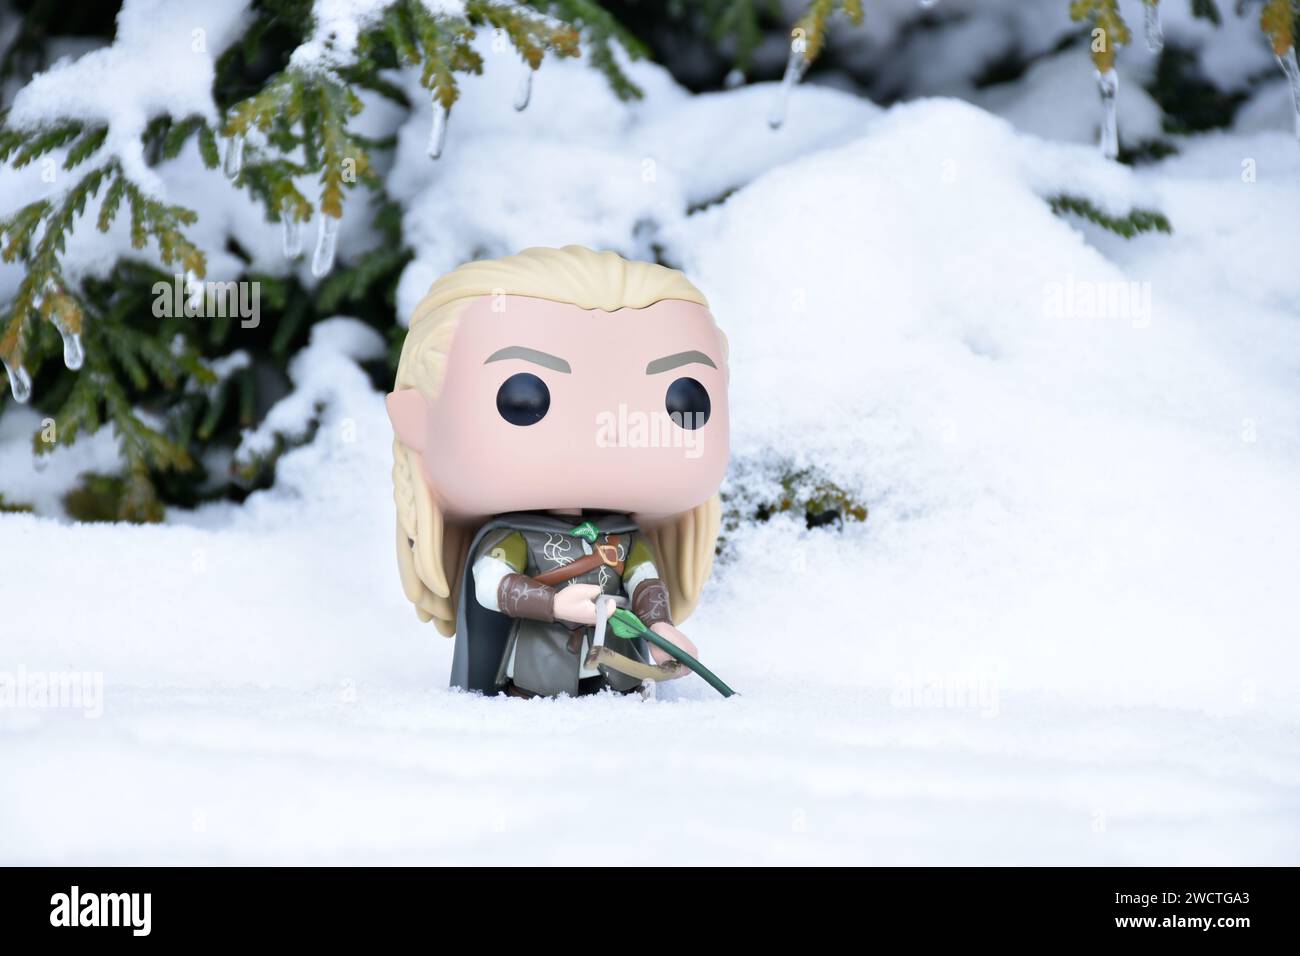 Funko Pop action figure of elf Legolas from fantasy movie The Lord of the Rings. Warrior holding bow and arrow. Winter forest, snow, green woods. Stock Photo